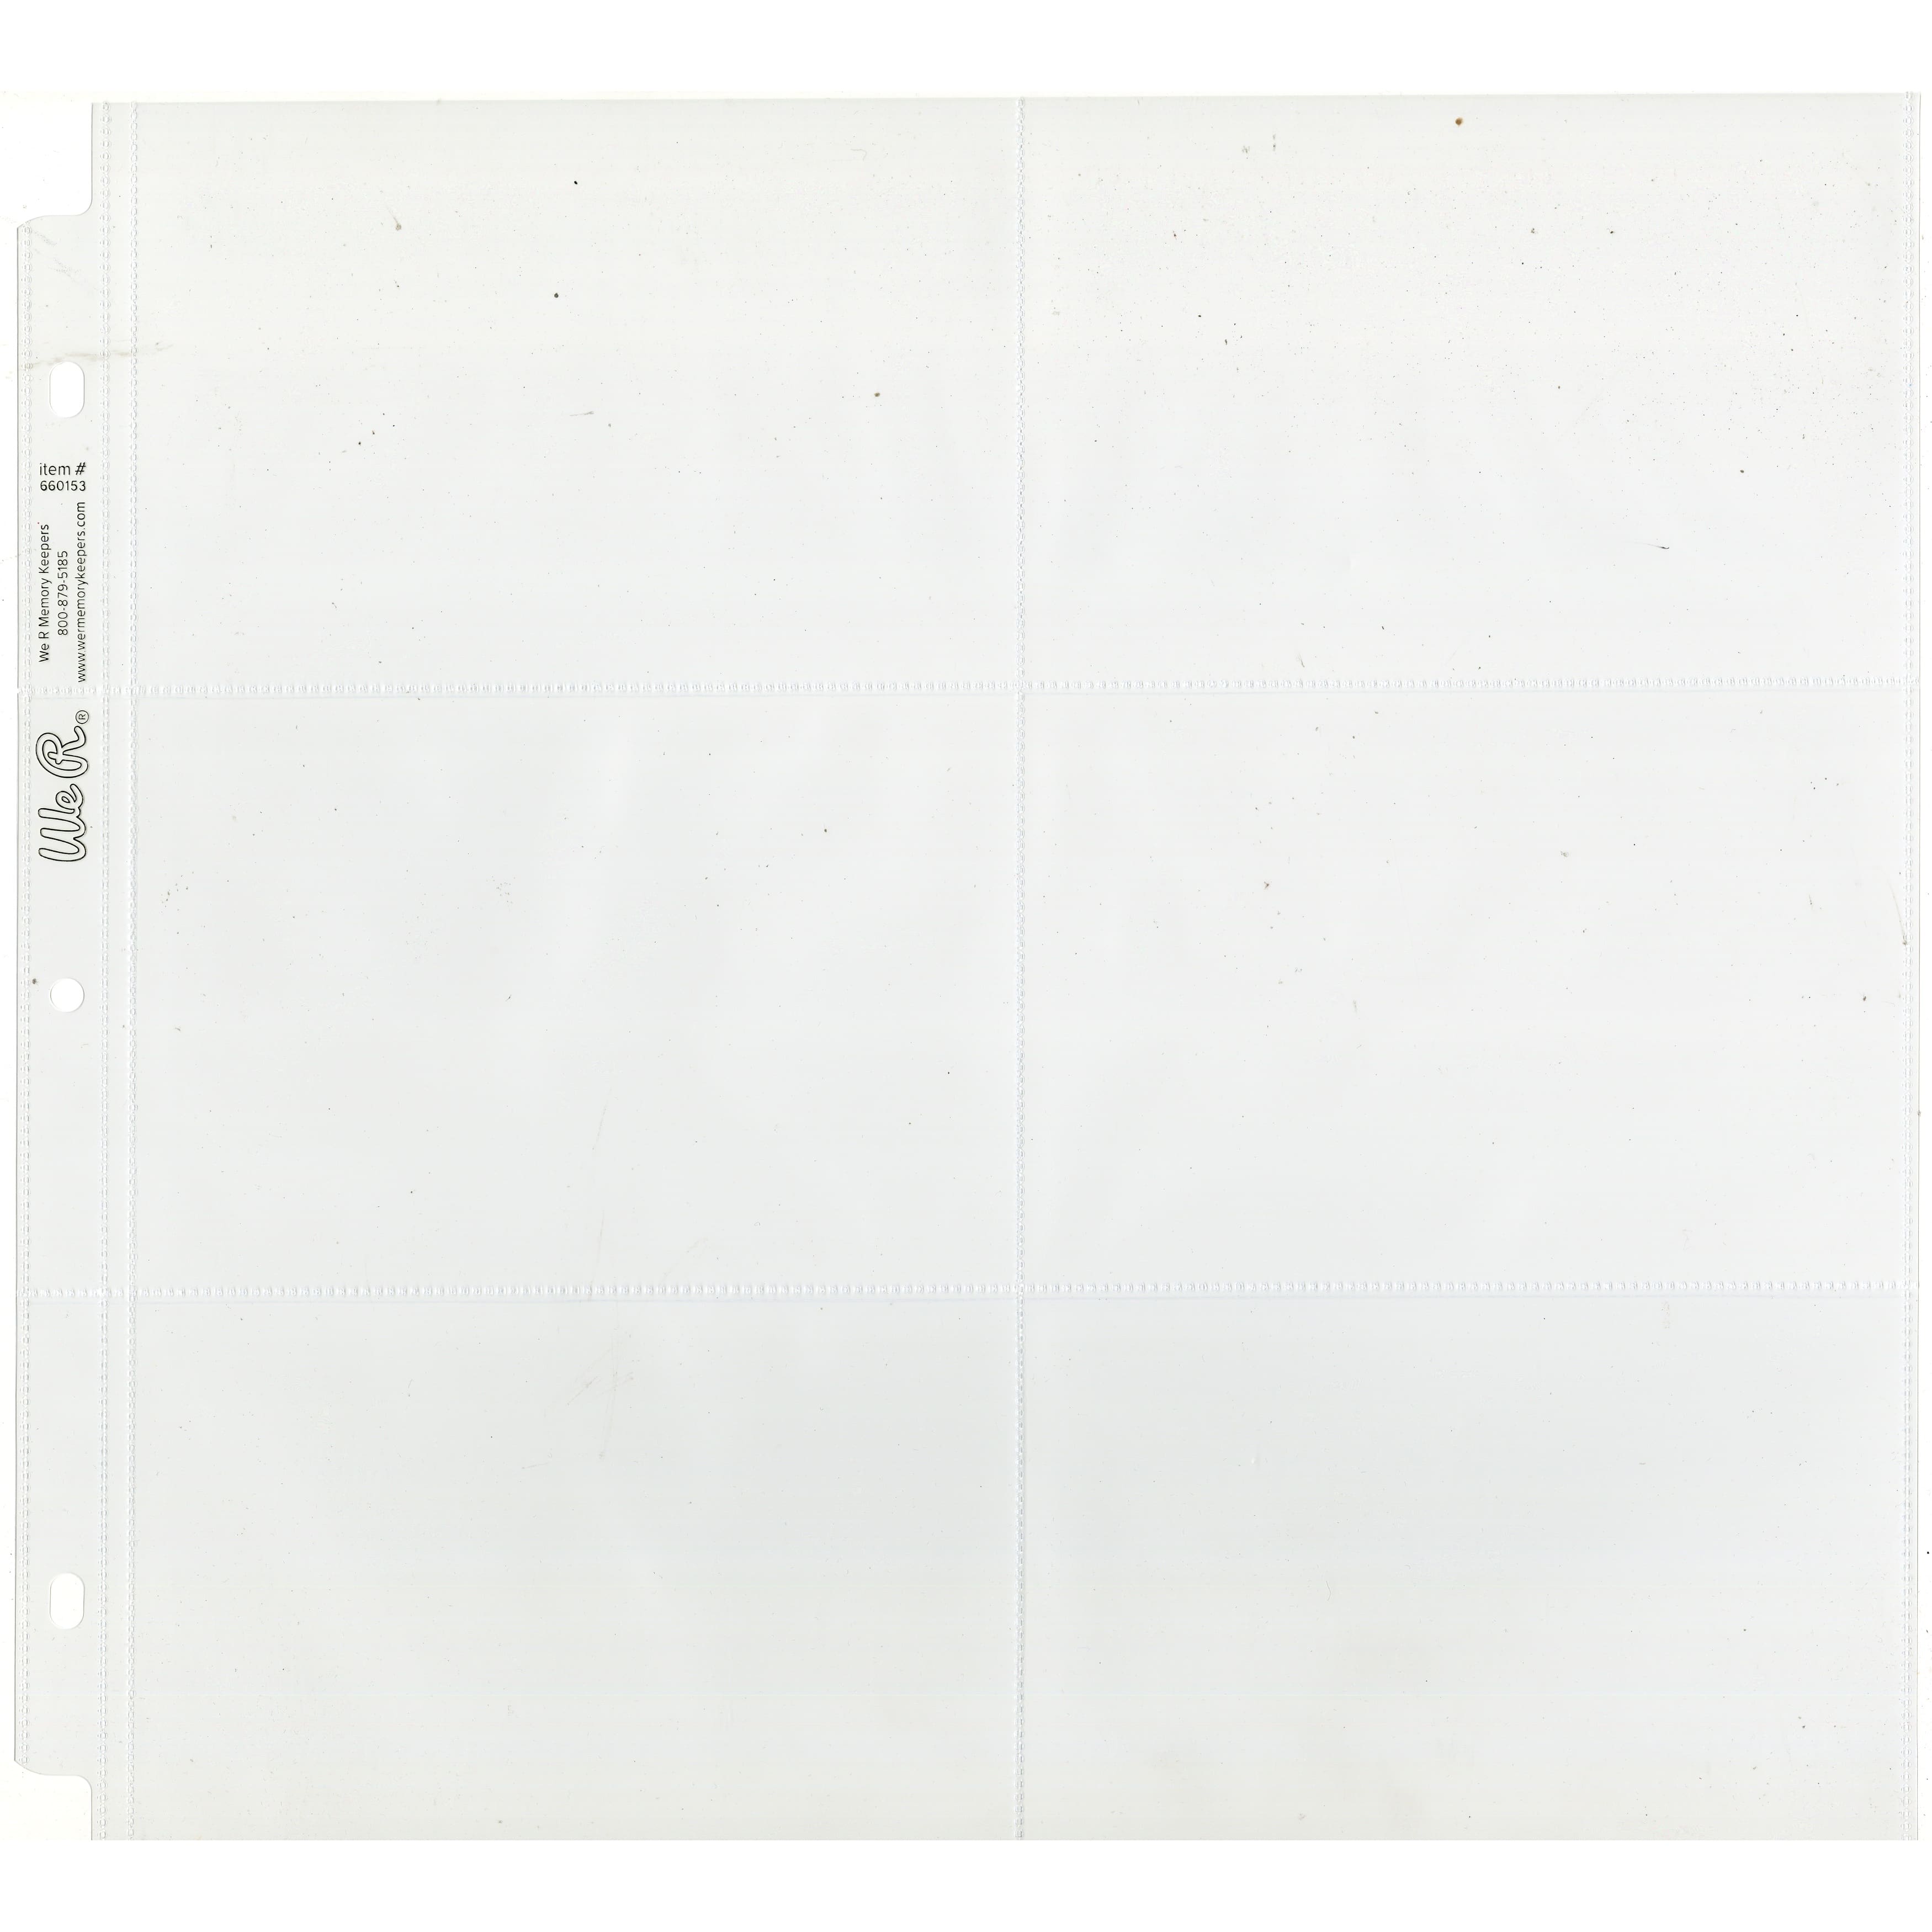 We R Memory Keepers® 12 x 12 Post Photo Sleeves with 4 x 6 Pockets,  10ct., Michaels